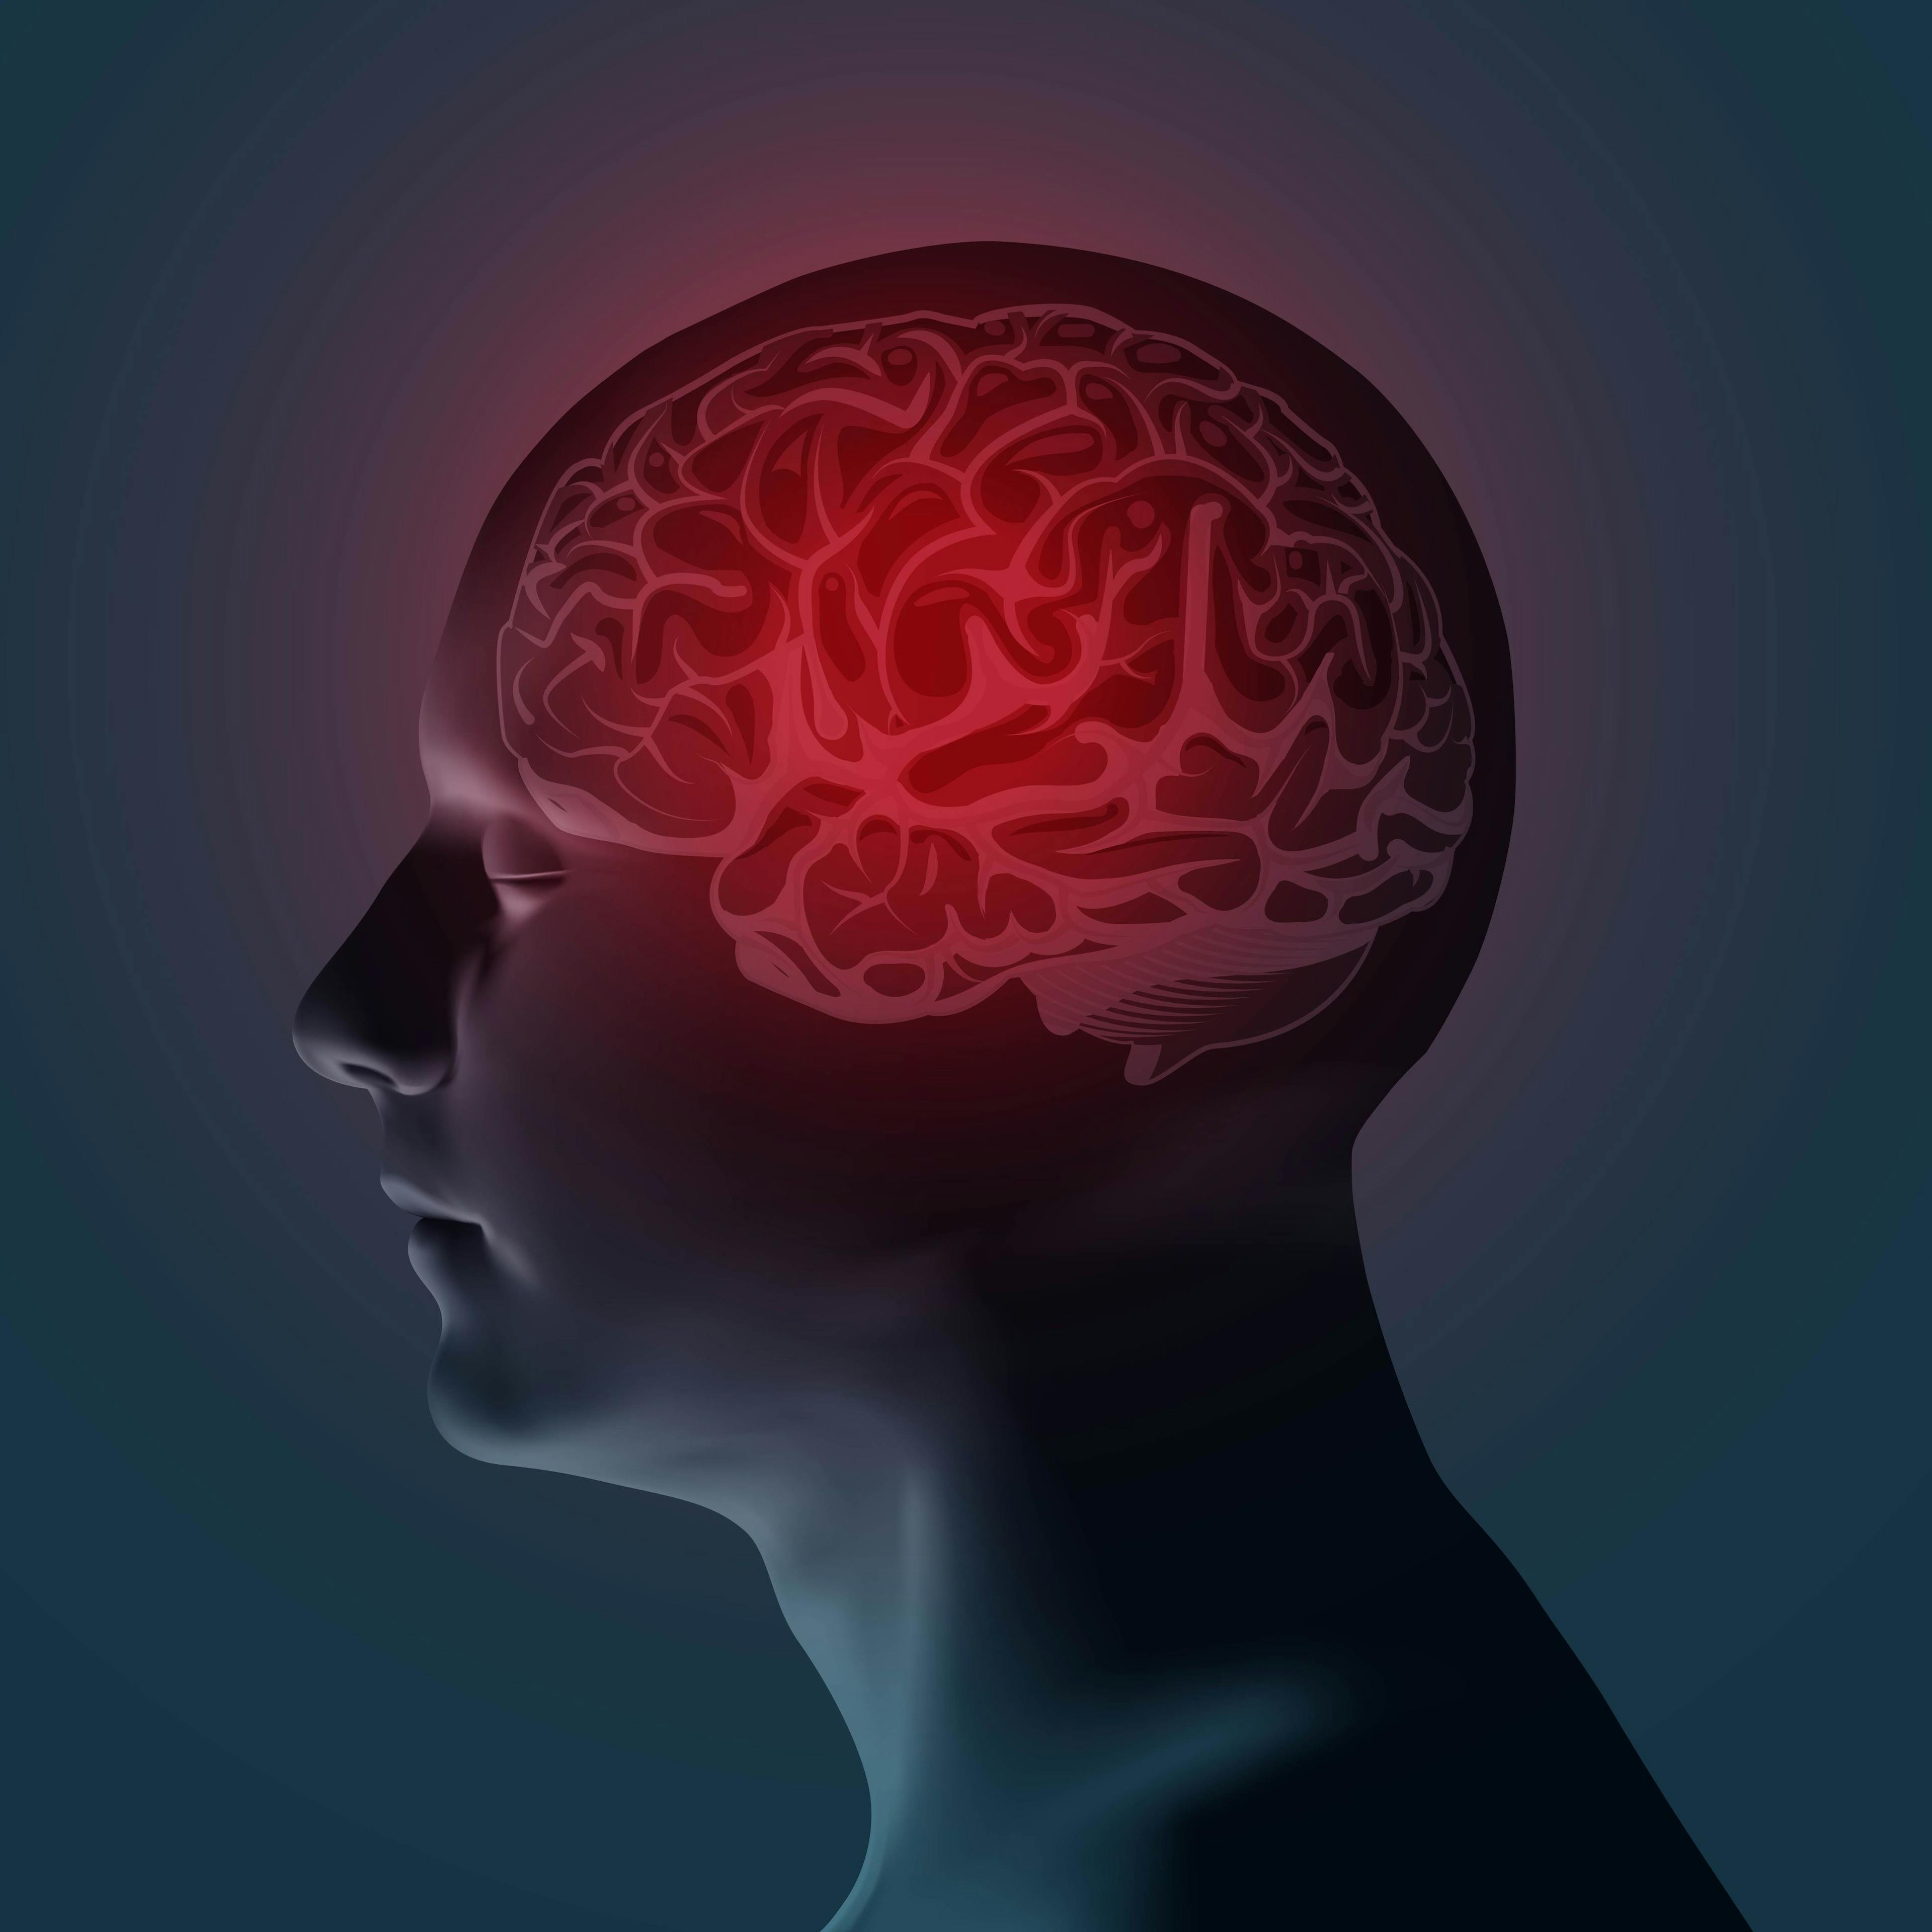 Erenumab Monotherapy Shows Sustained Long-Term Efficacy in Patients With Episodic Migraine